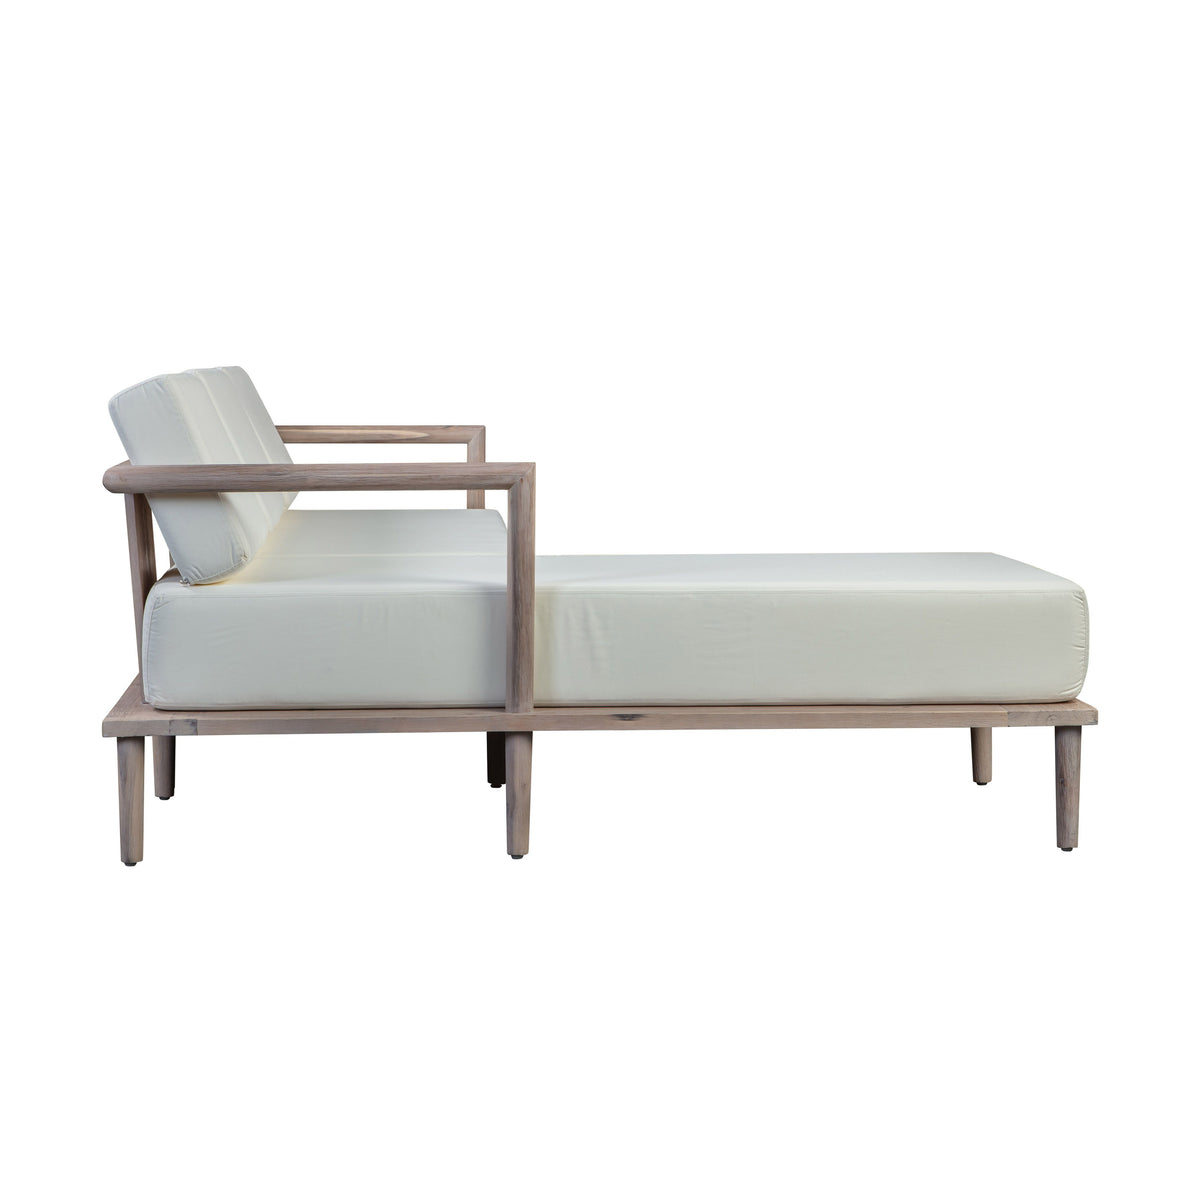 Christiana Cream Outdoor Sectional - Luxury Living Collection